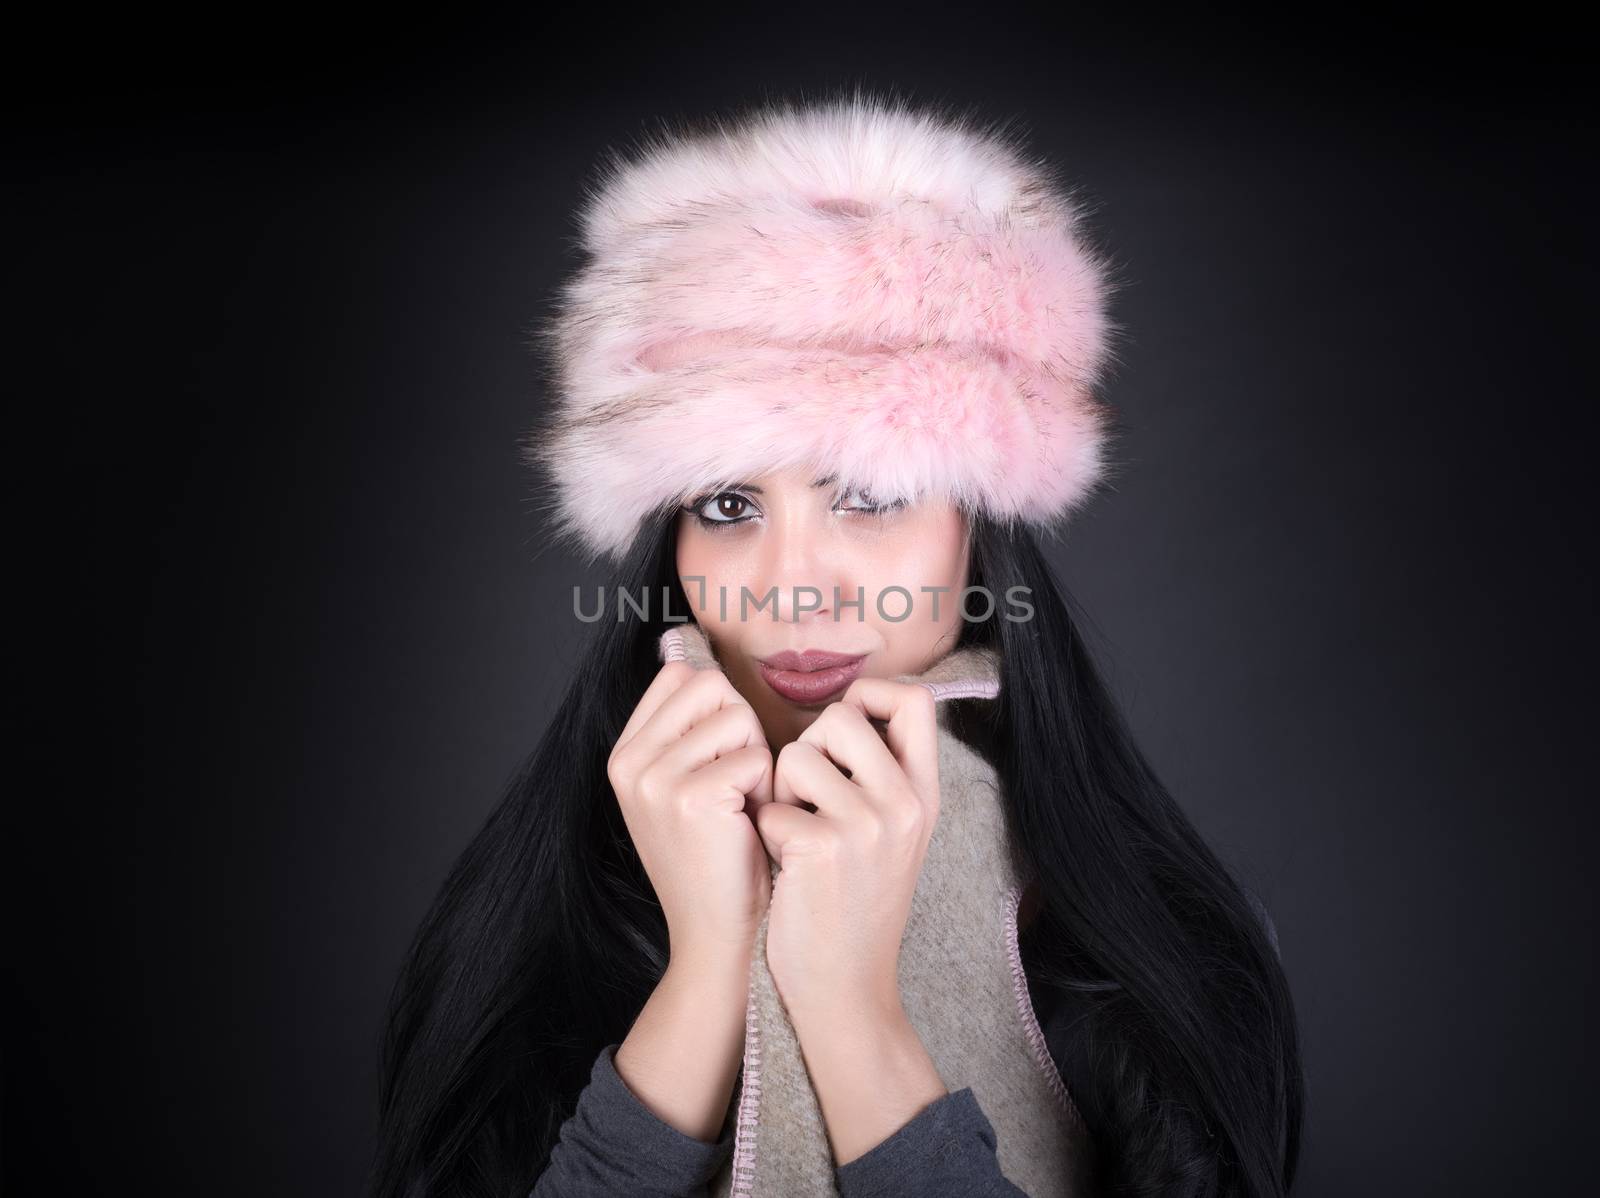 Winter portrait of a young woman in a pink hat on black background